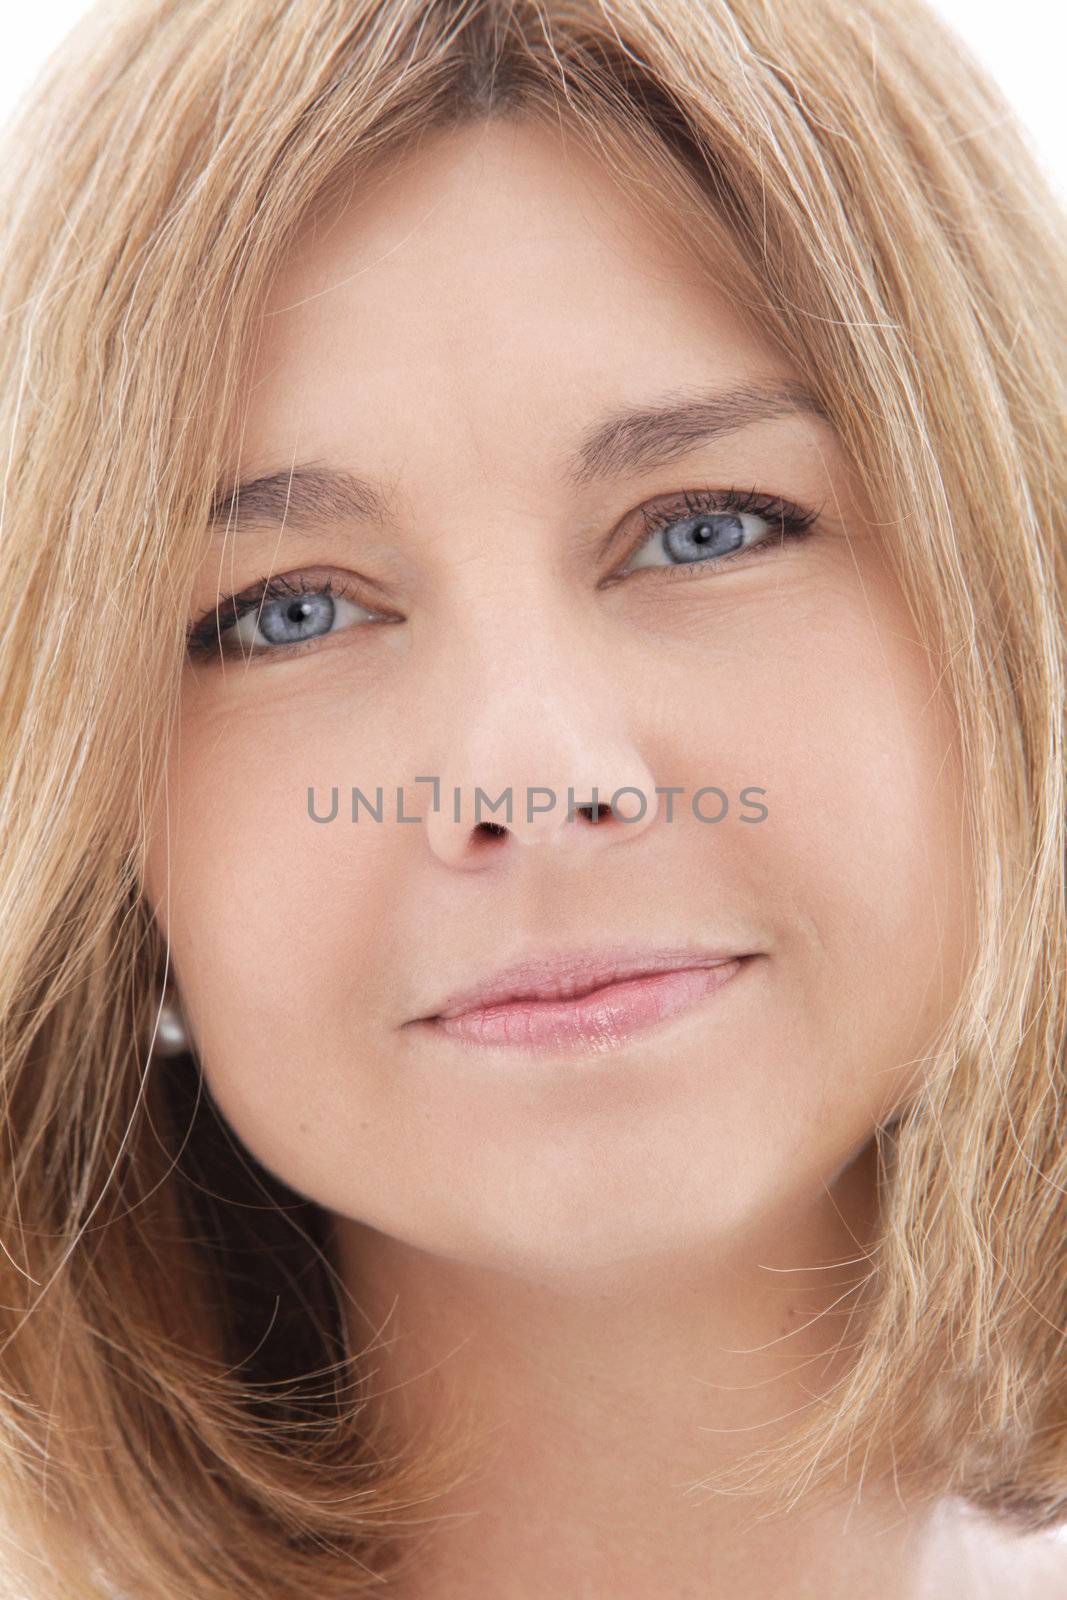 Closeup headshot portrait of an attractive mature woman with beautiful skin and shoulder length blond hair